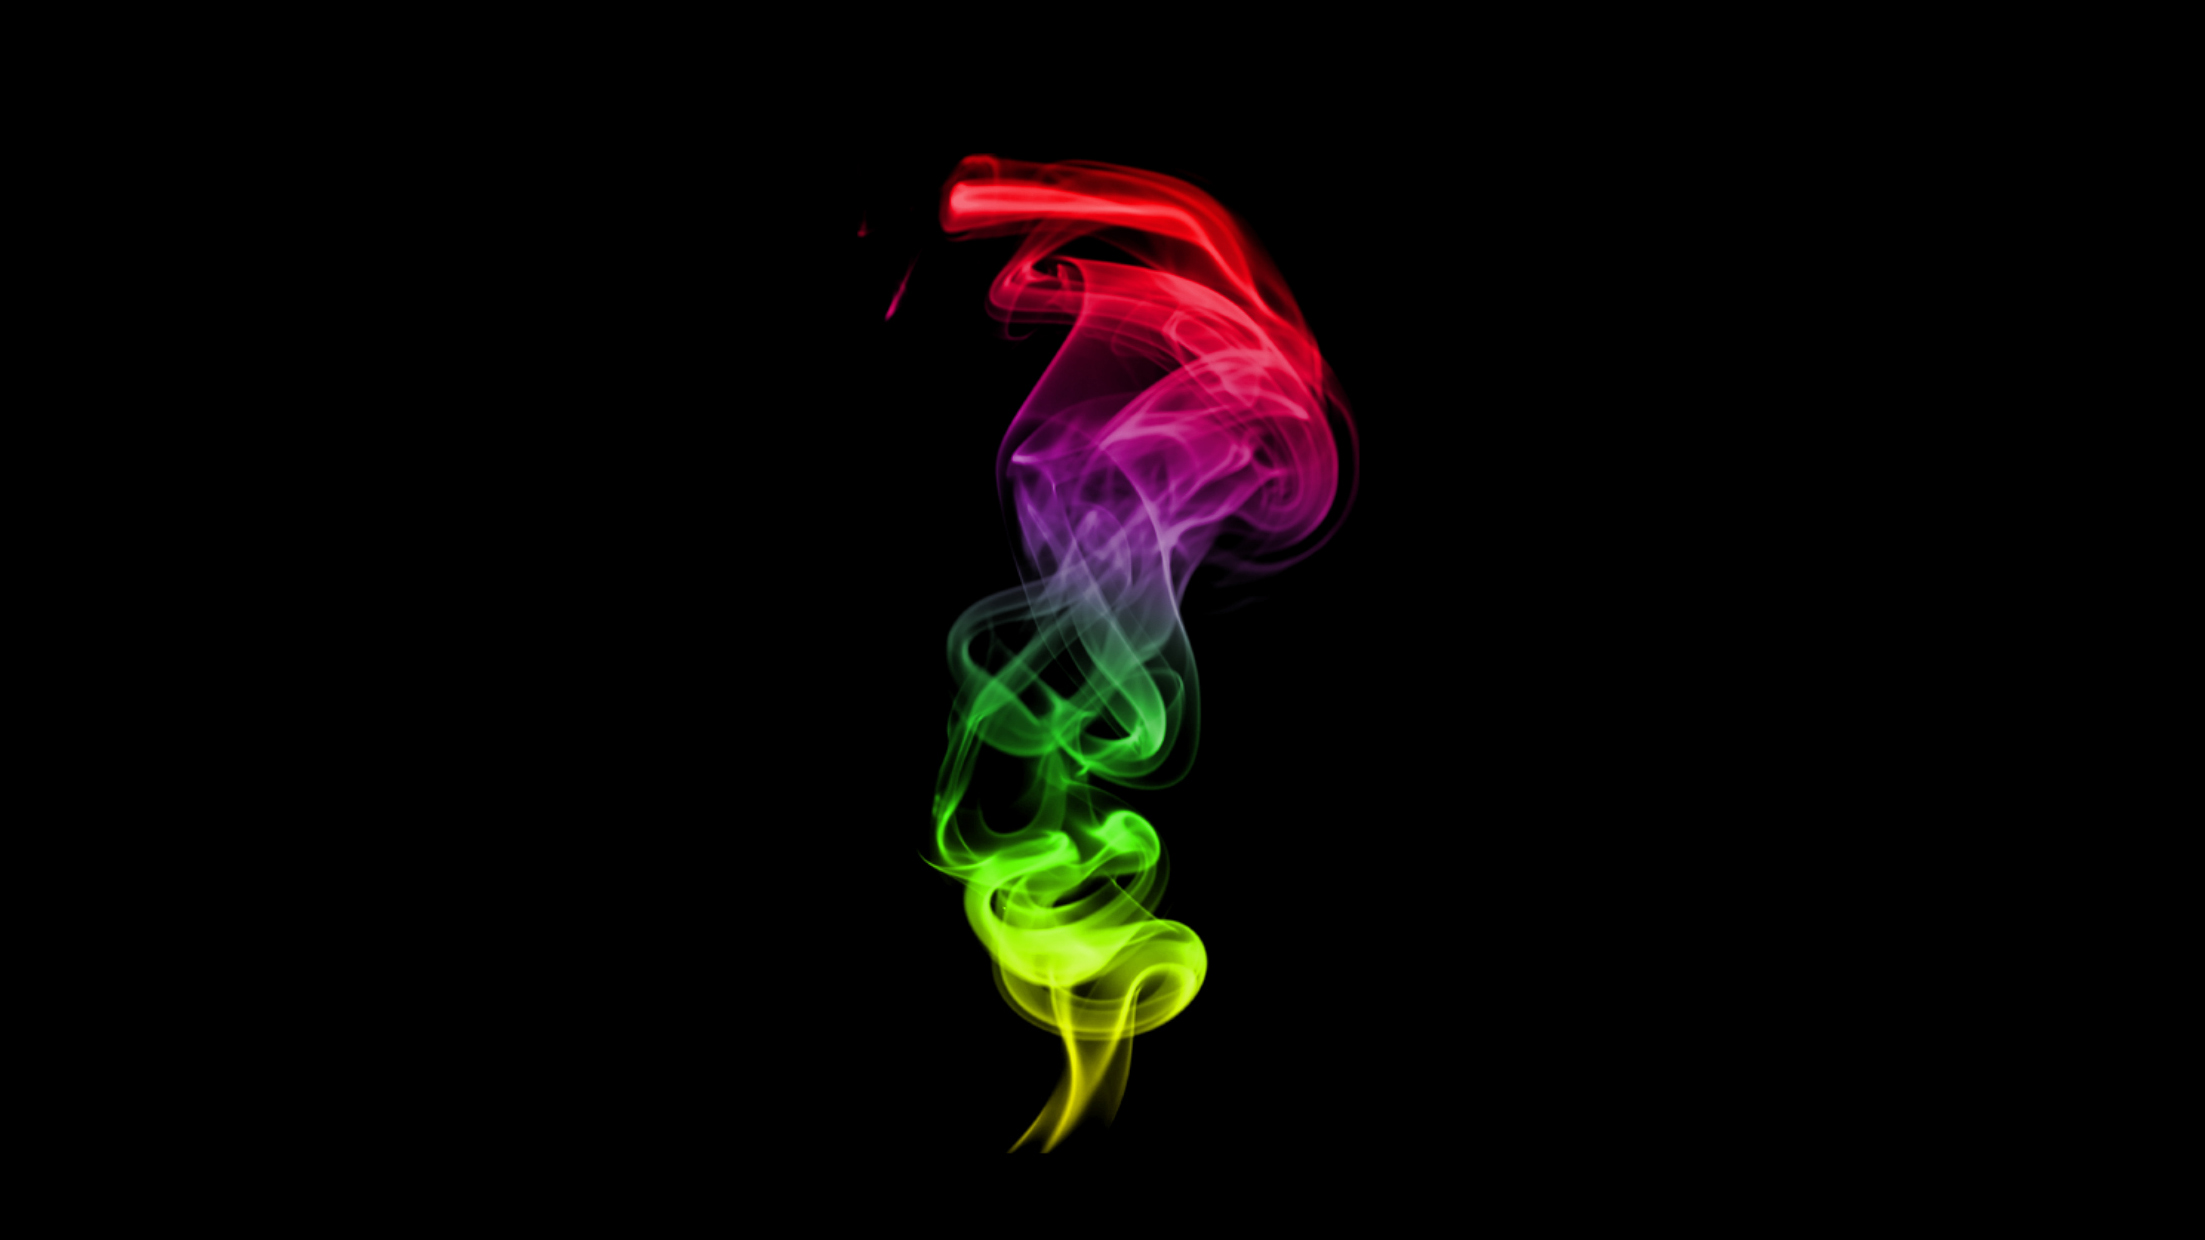 Colored Smoke by kennywfz on DeviantArt